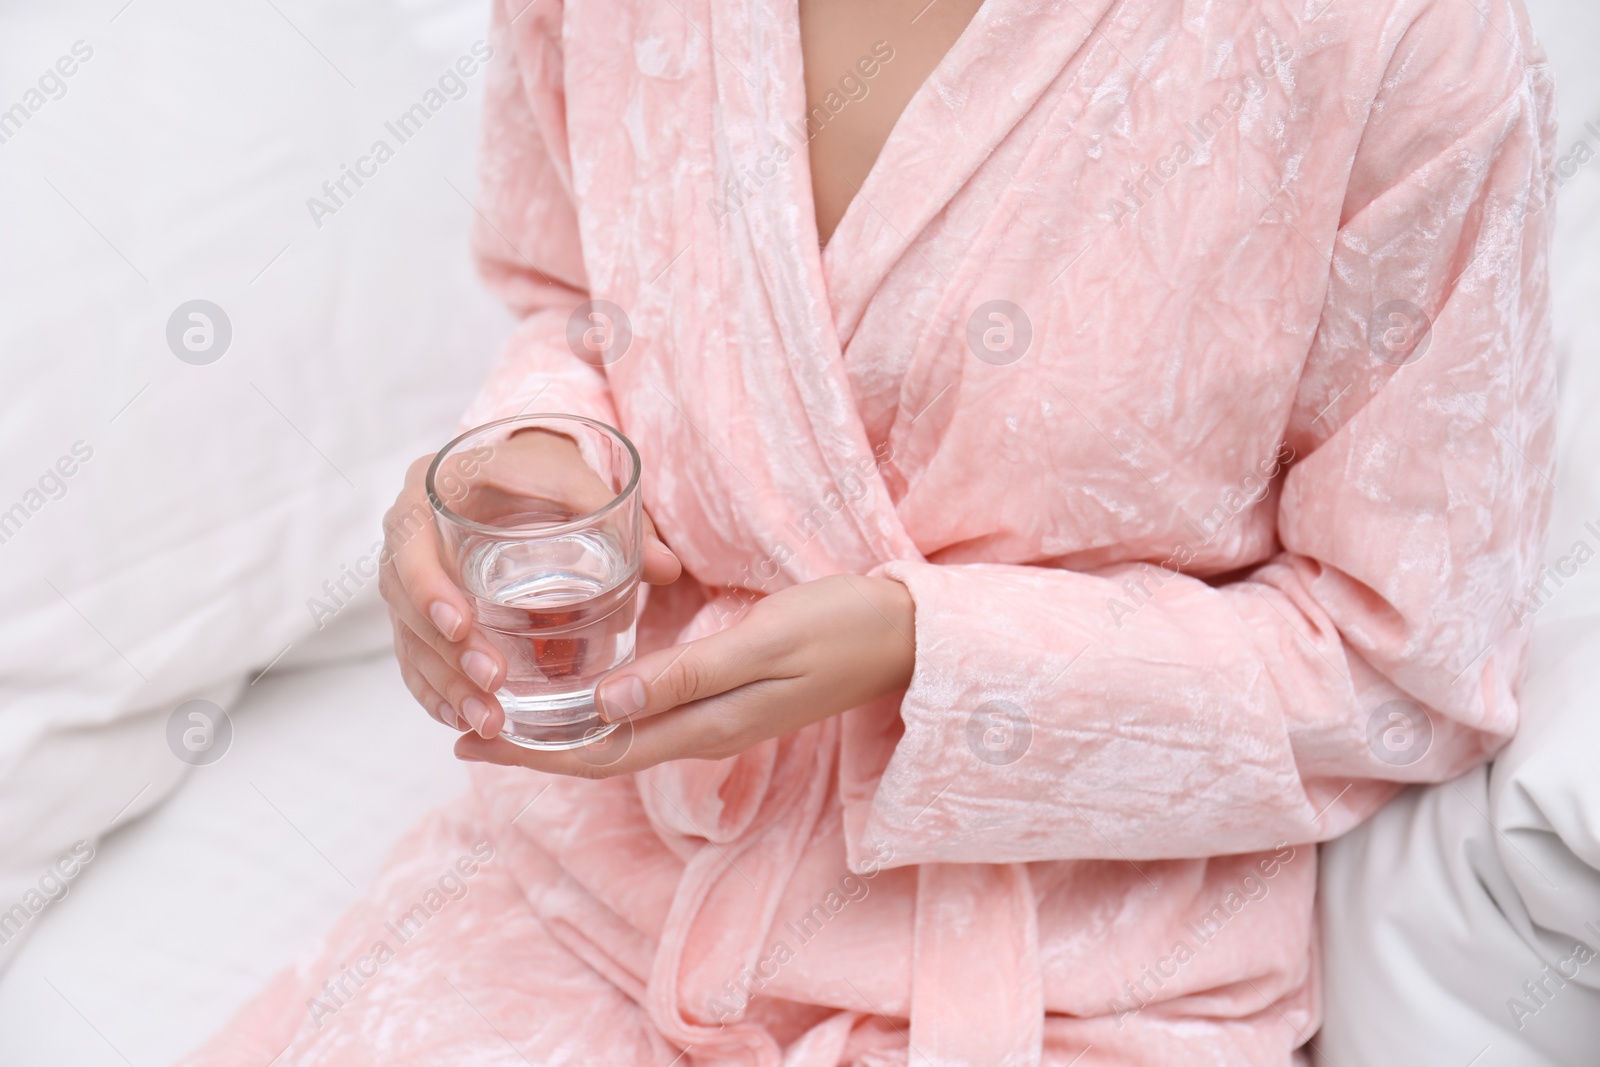 Photo of Woman holding glass of water in bedroom, closeup